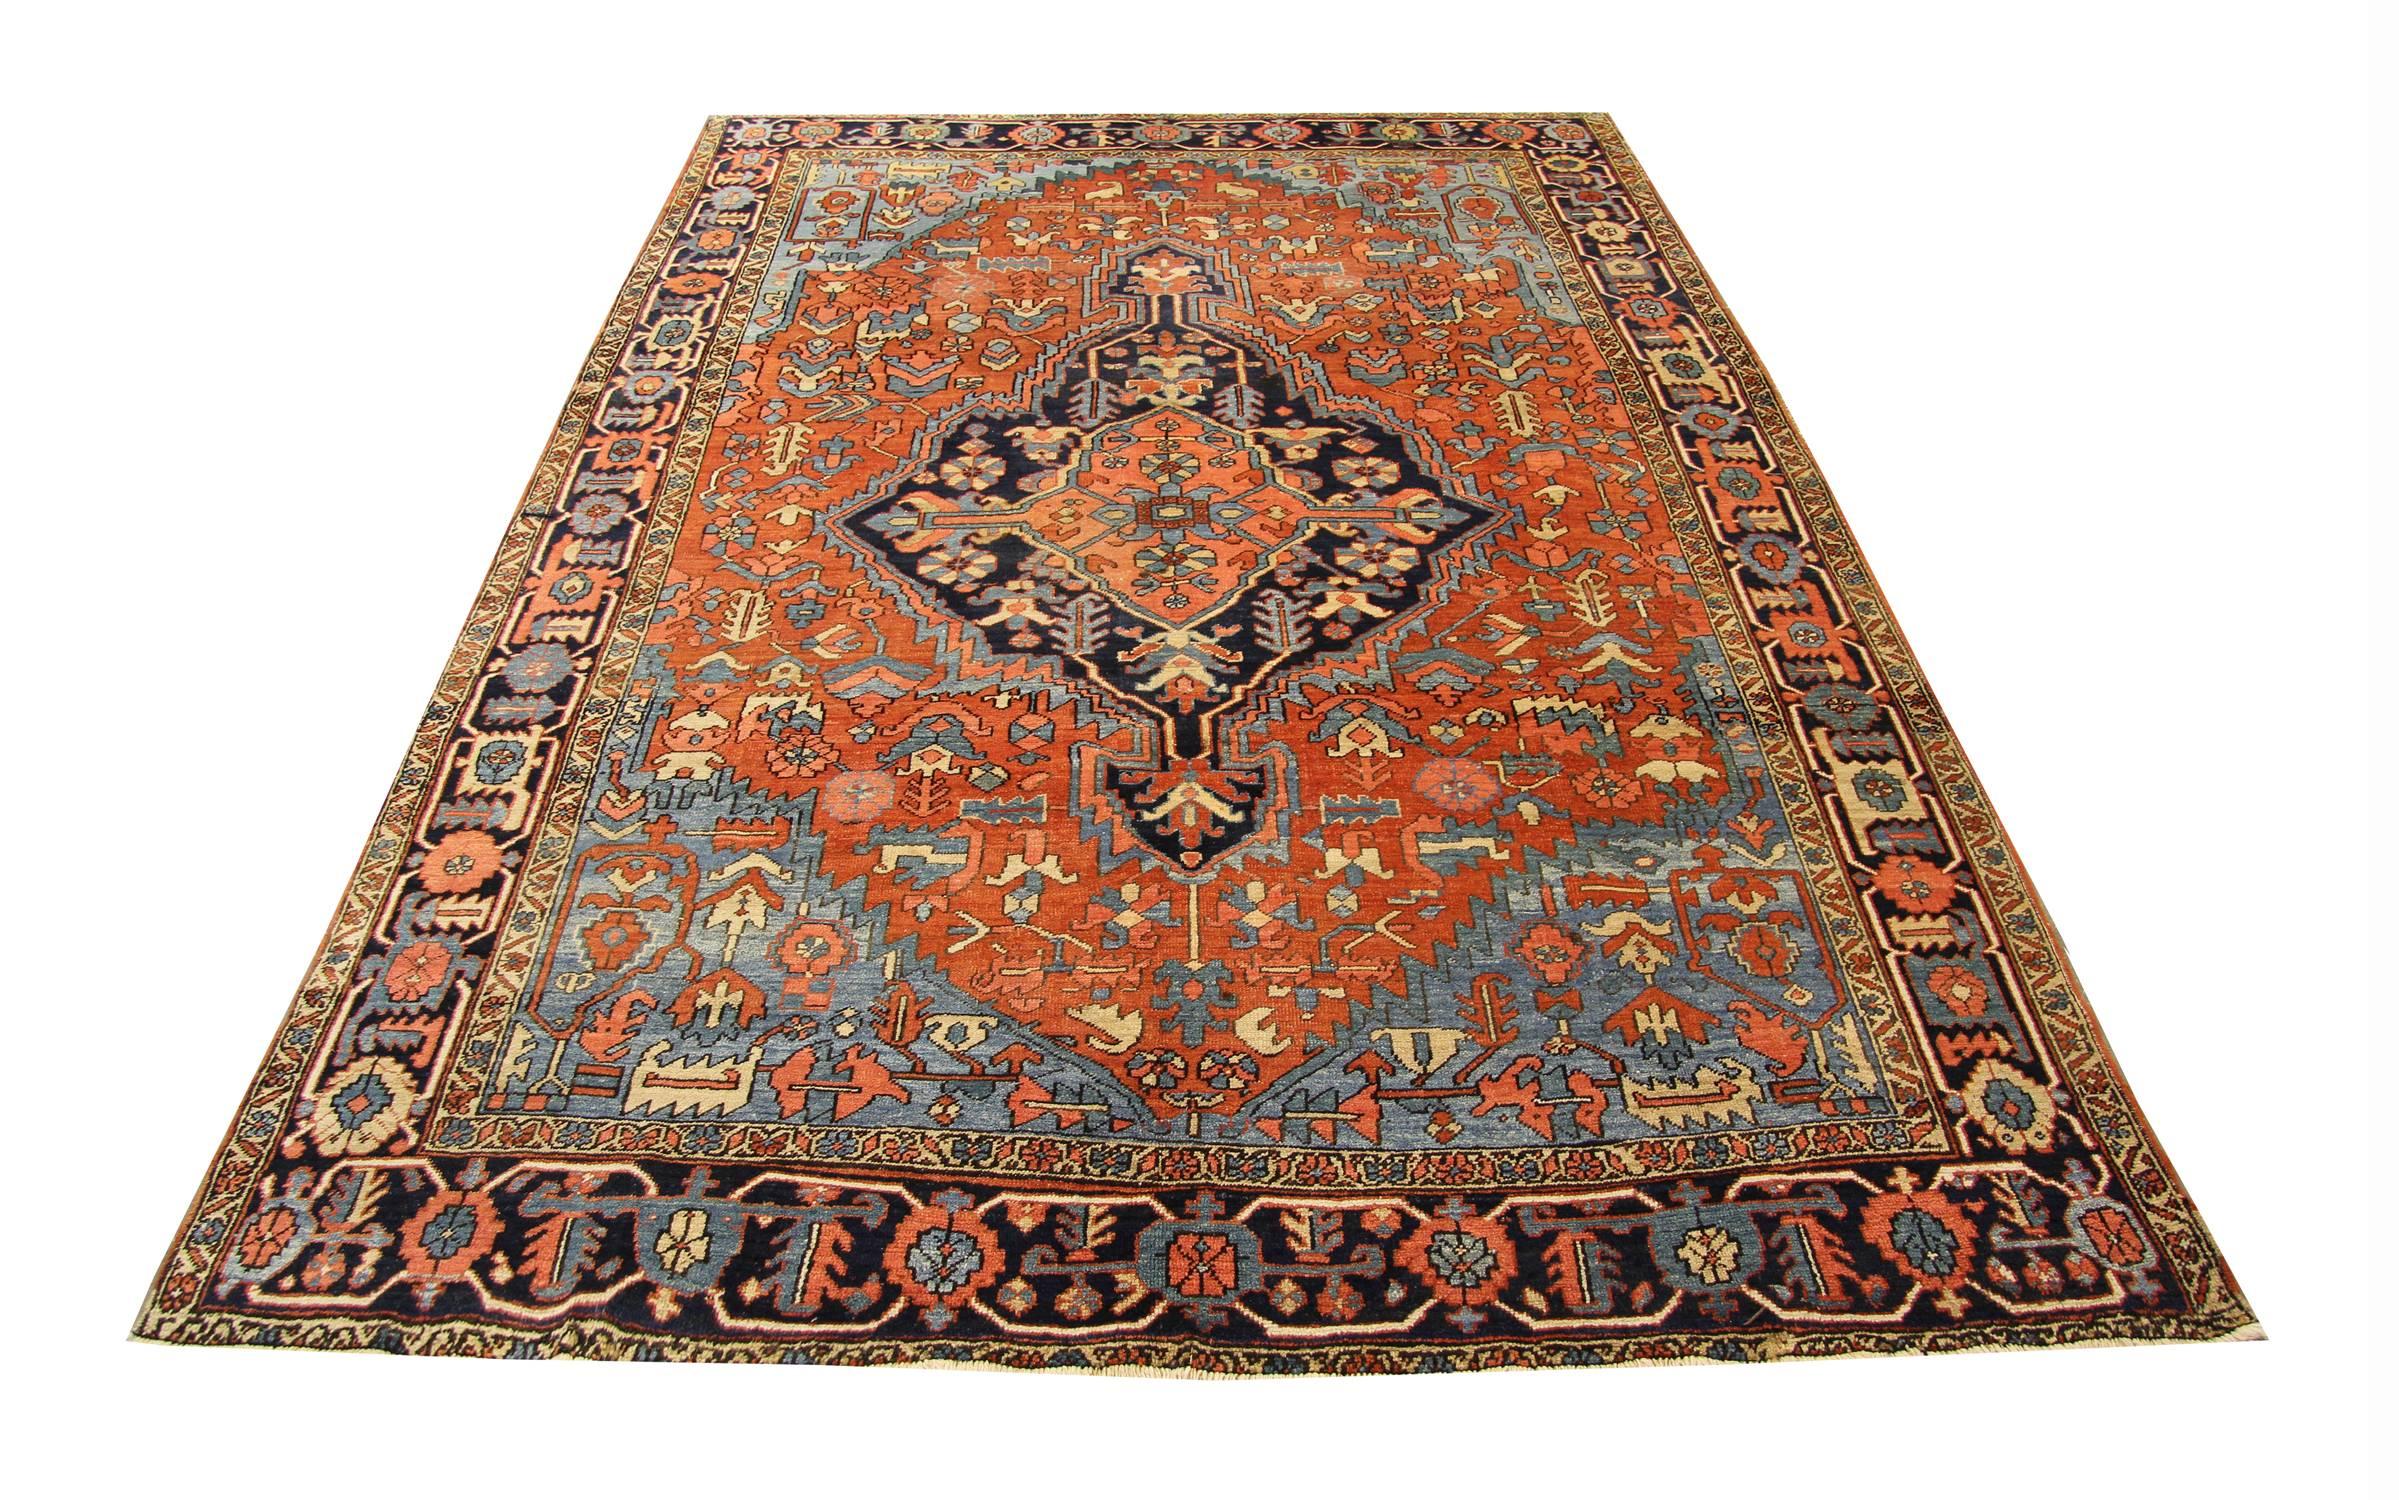 Heriz Persian carpet is one of the most sought-after carpet by decorators and collectors. This is due to their qualities, because those oriental rugs are very durable and hardwearing. They are chosen for their versatility and are known as high